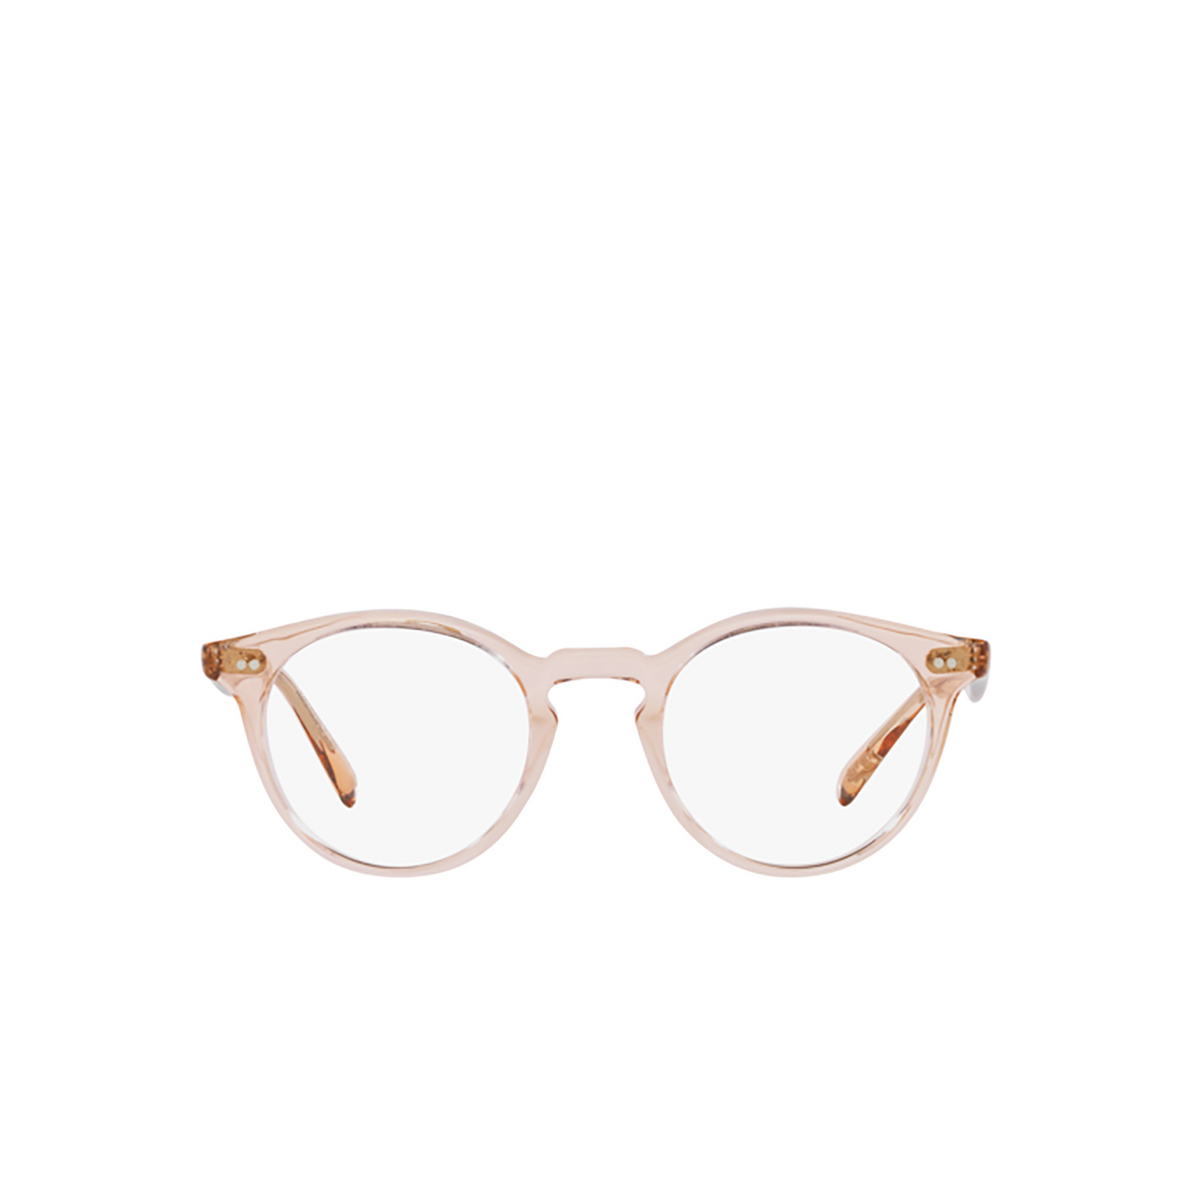 Oliver Peoples ROMARE Eyeglasses 1758 Champagne Quartz - front view